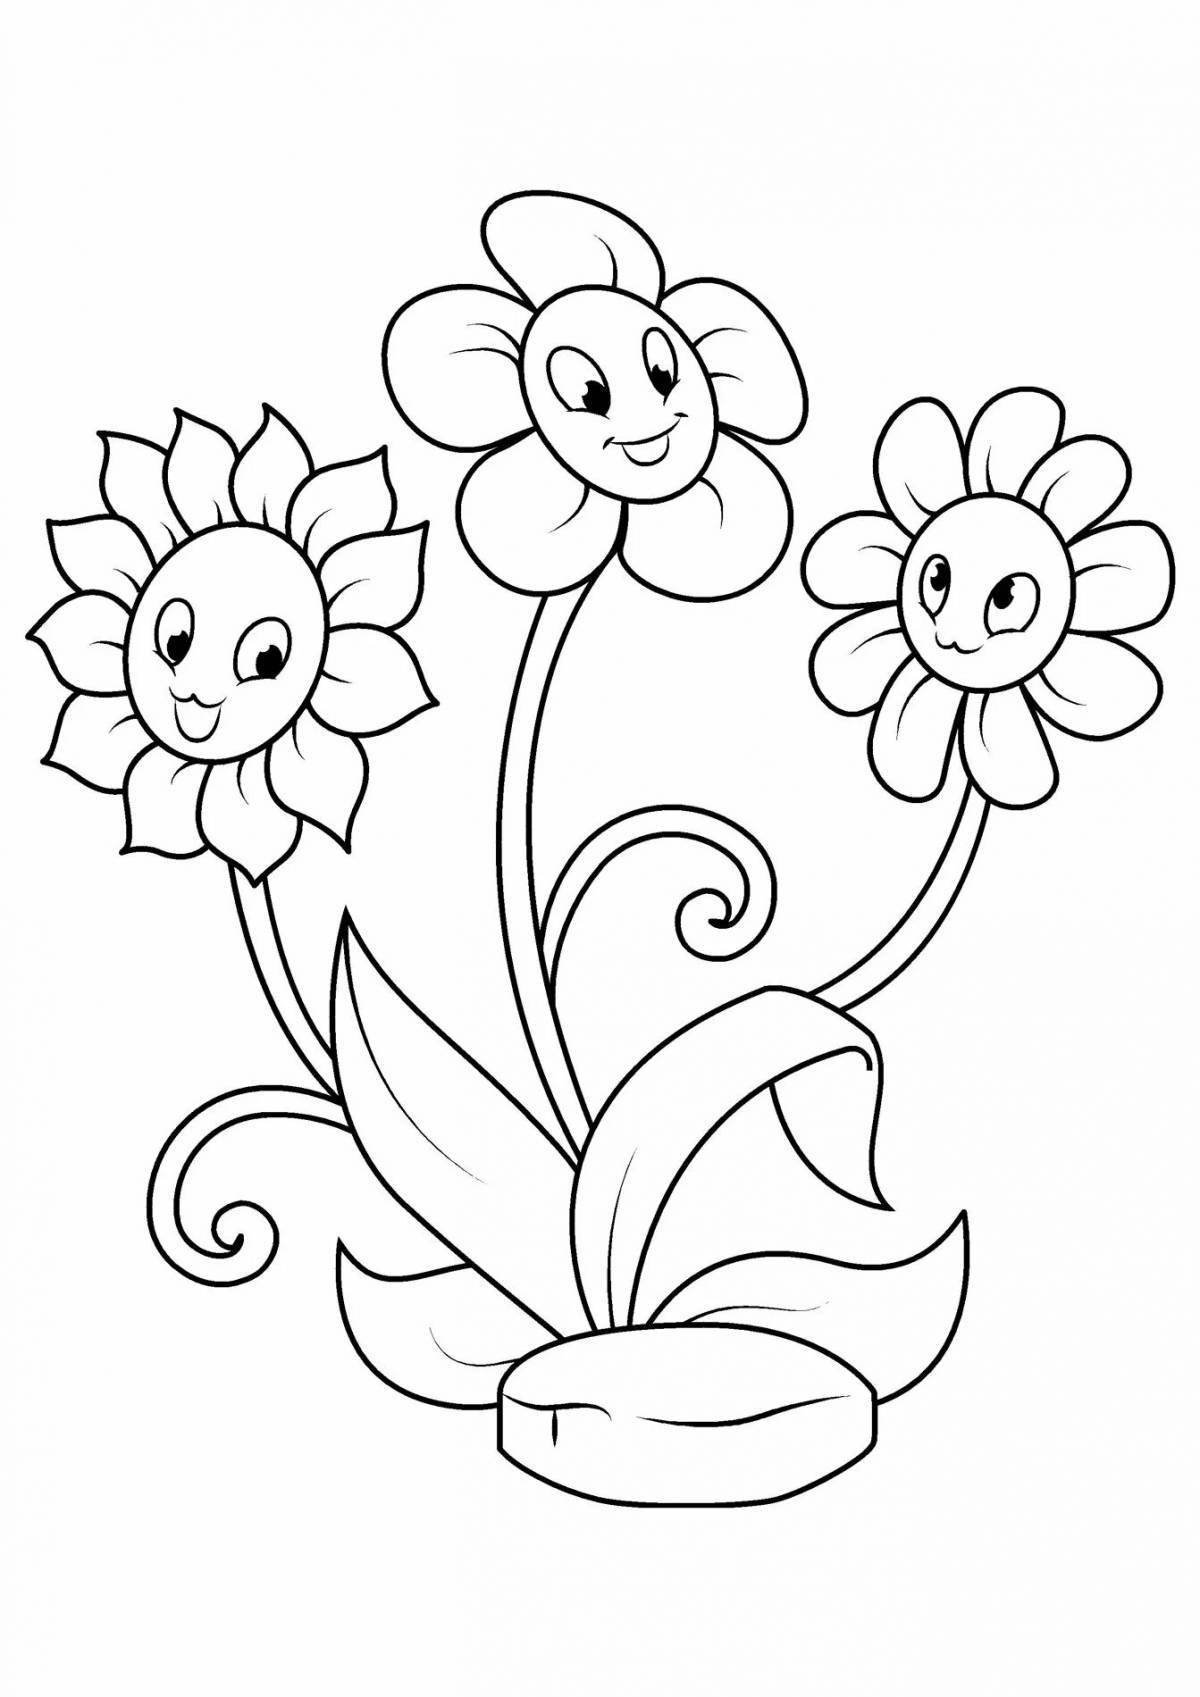 Coloring flowers for kids